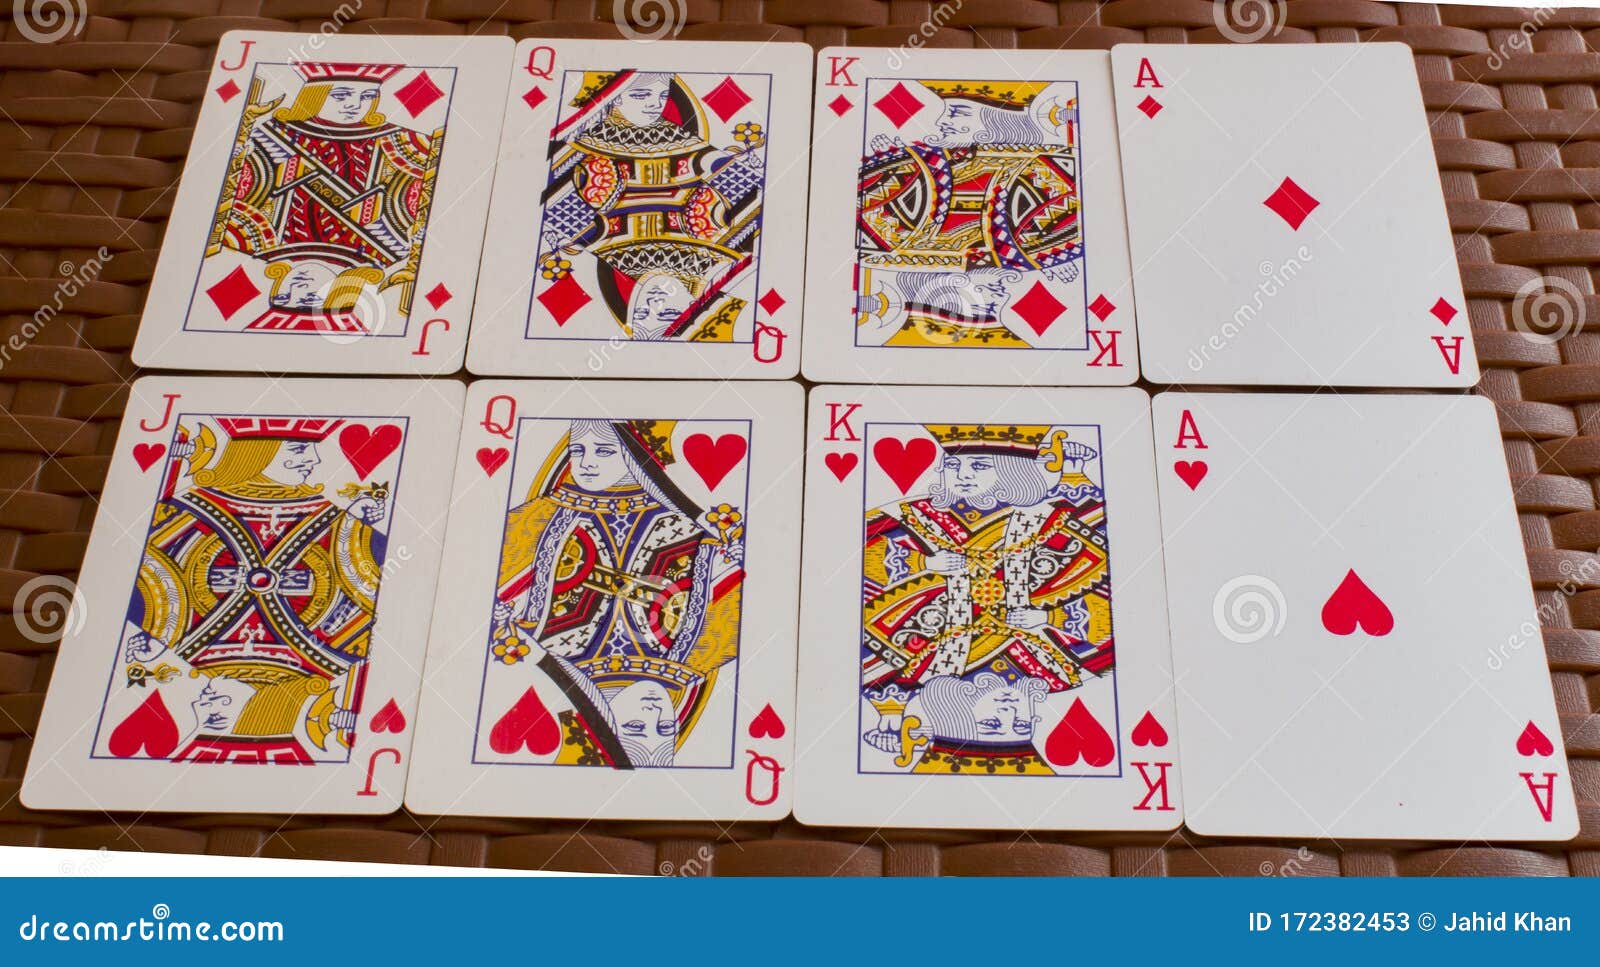 Playing Cards With Ace King Queen And Joker Stock Image Image Of Jack Hearts